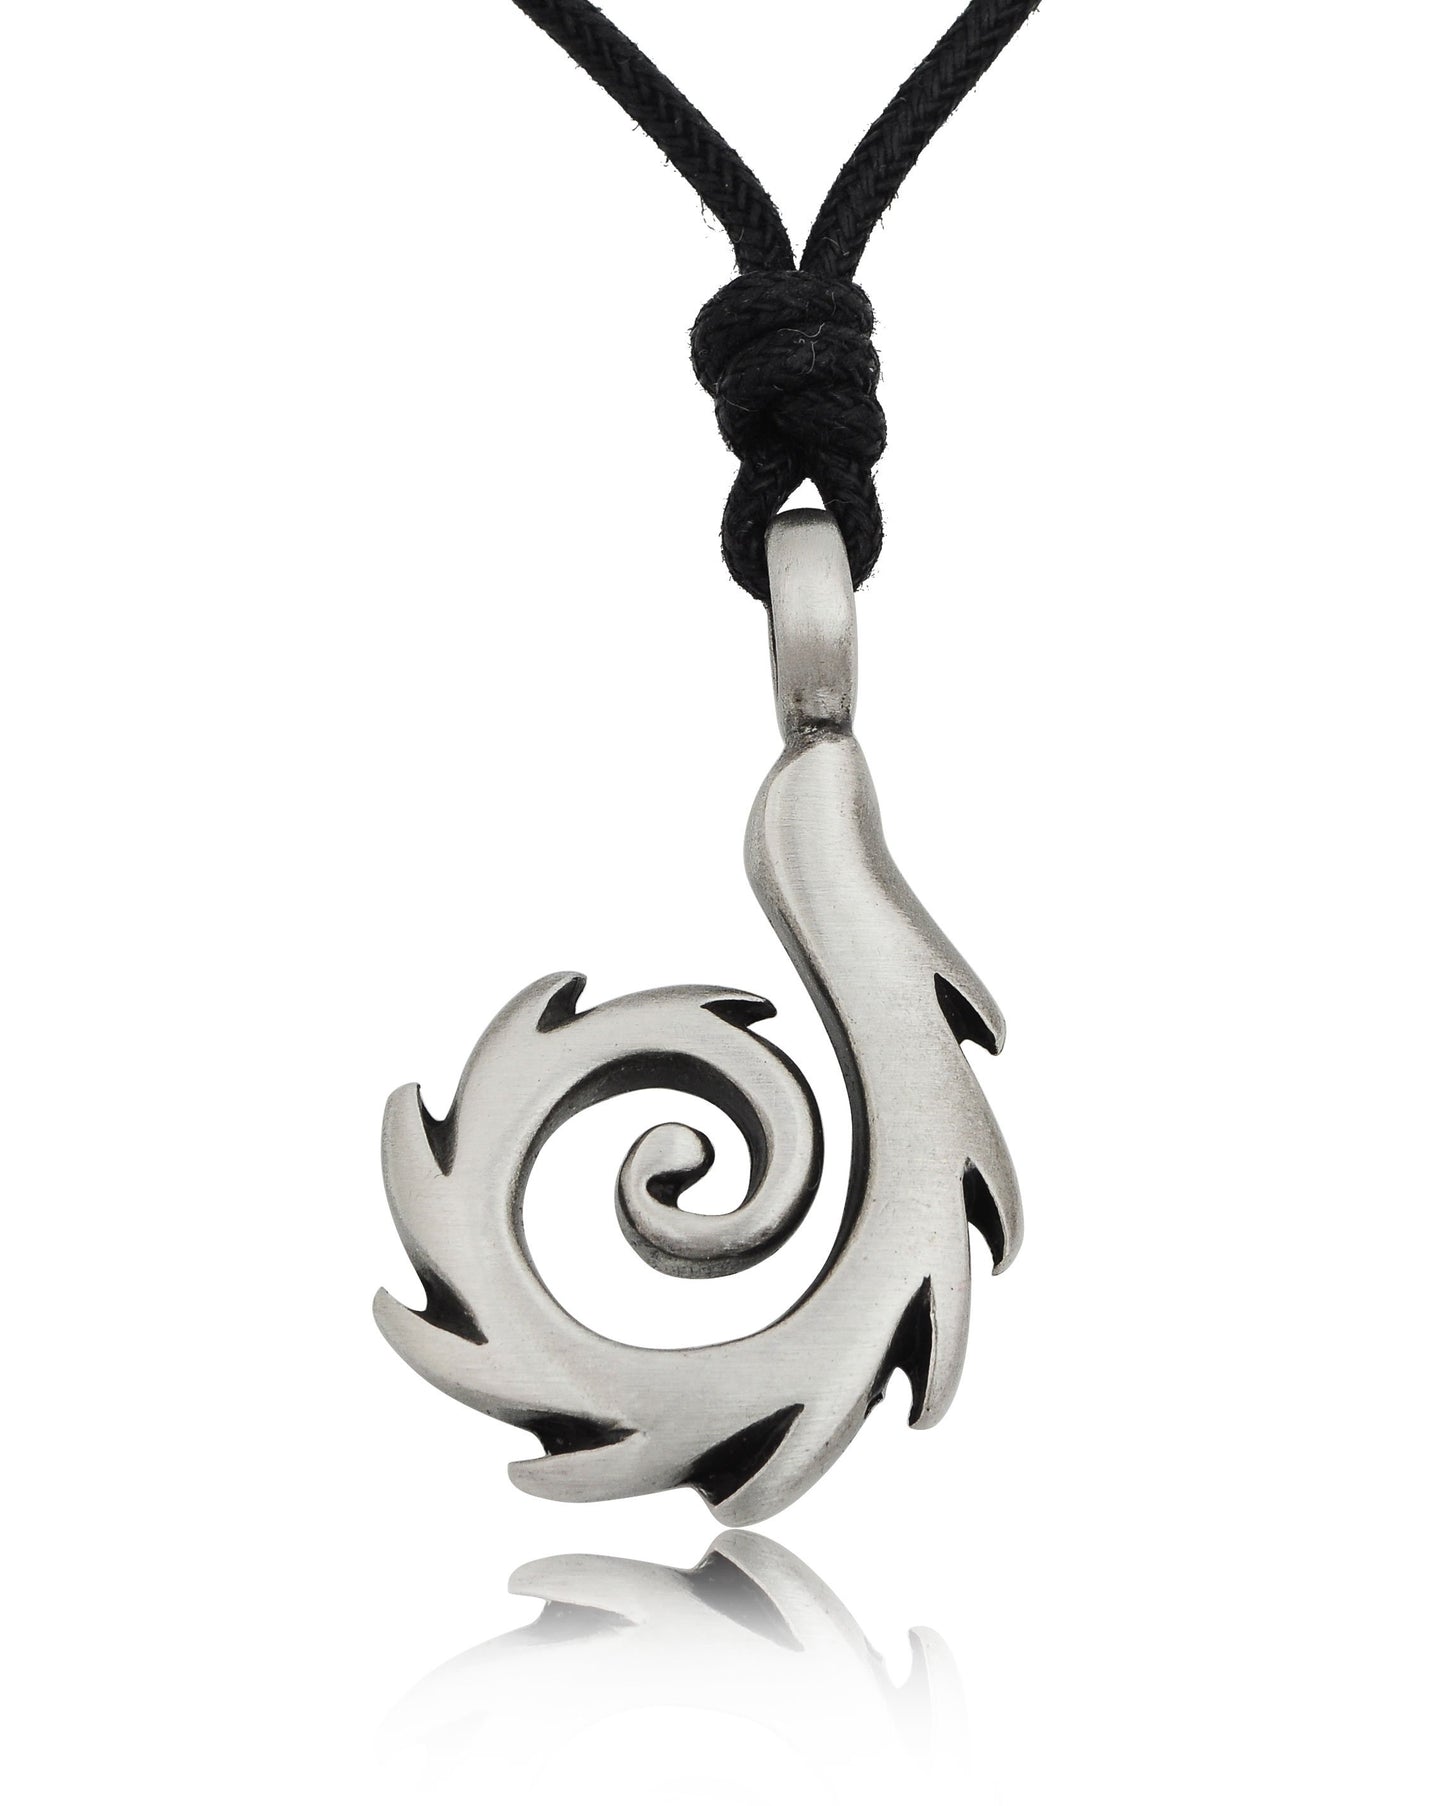 Tribal Maori Fishing Hook Silver Pewter Charm Necklace Pendant Jewelry